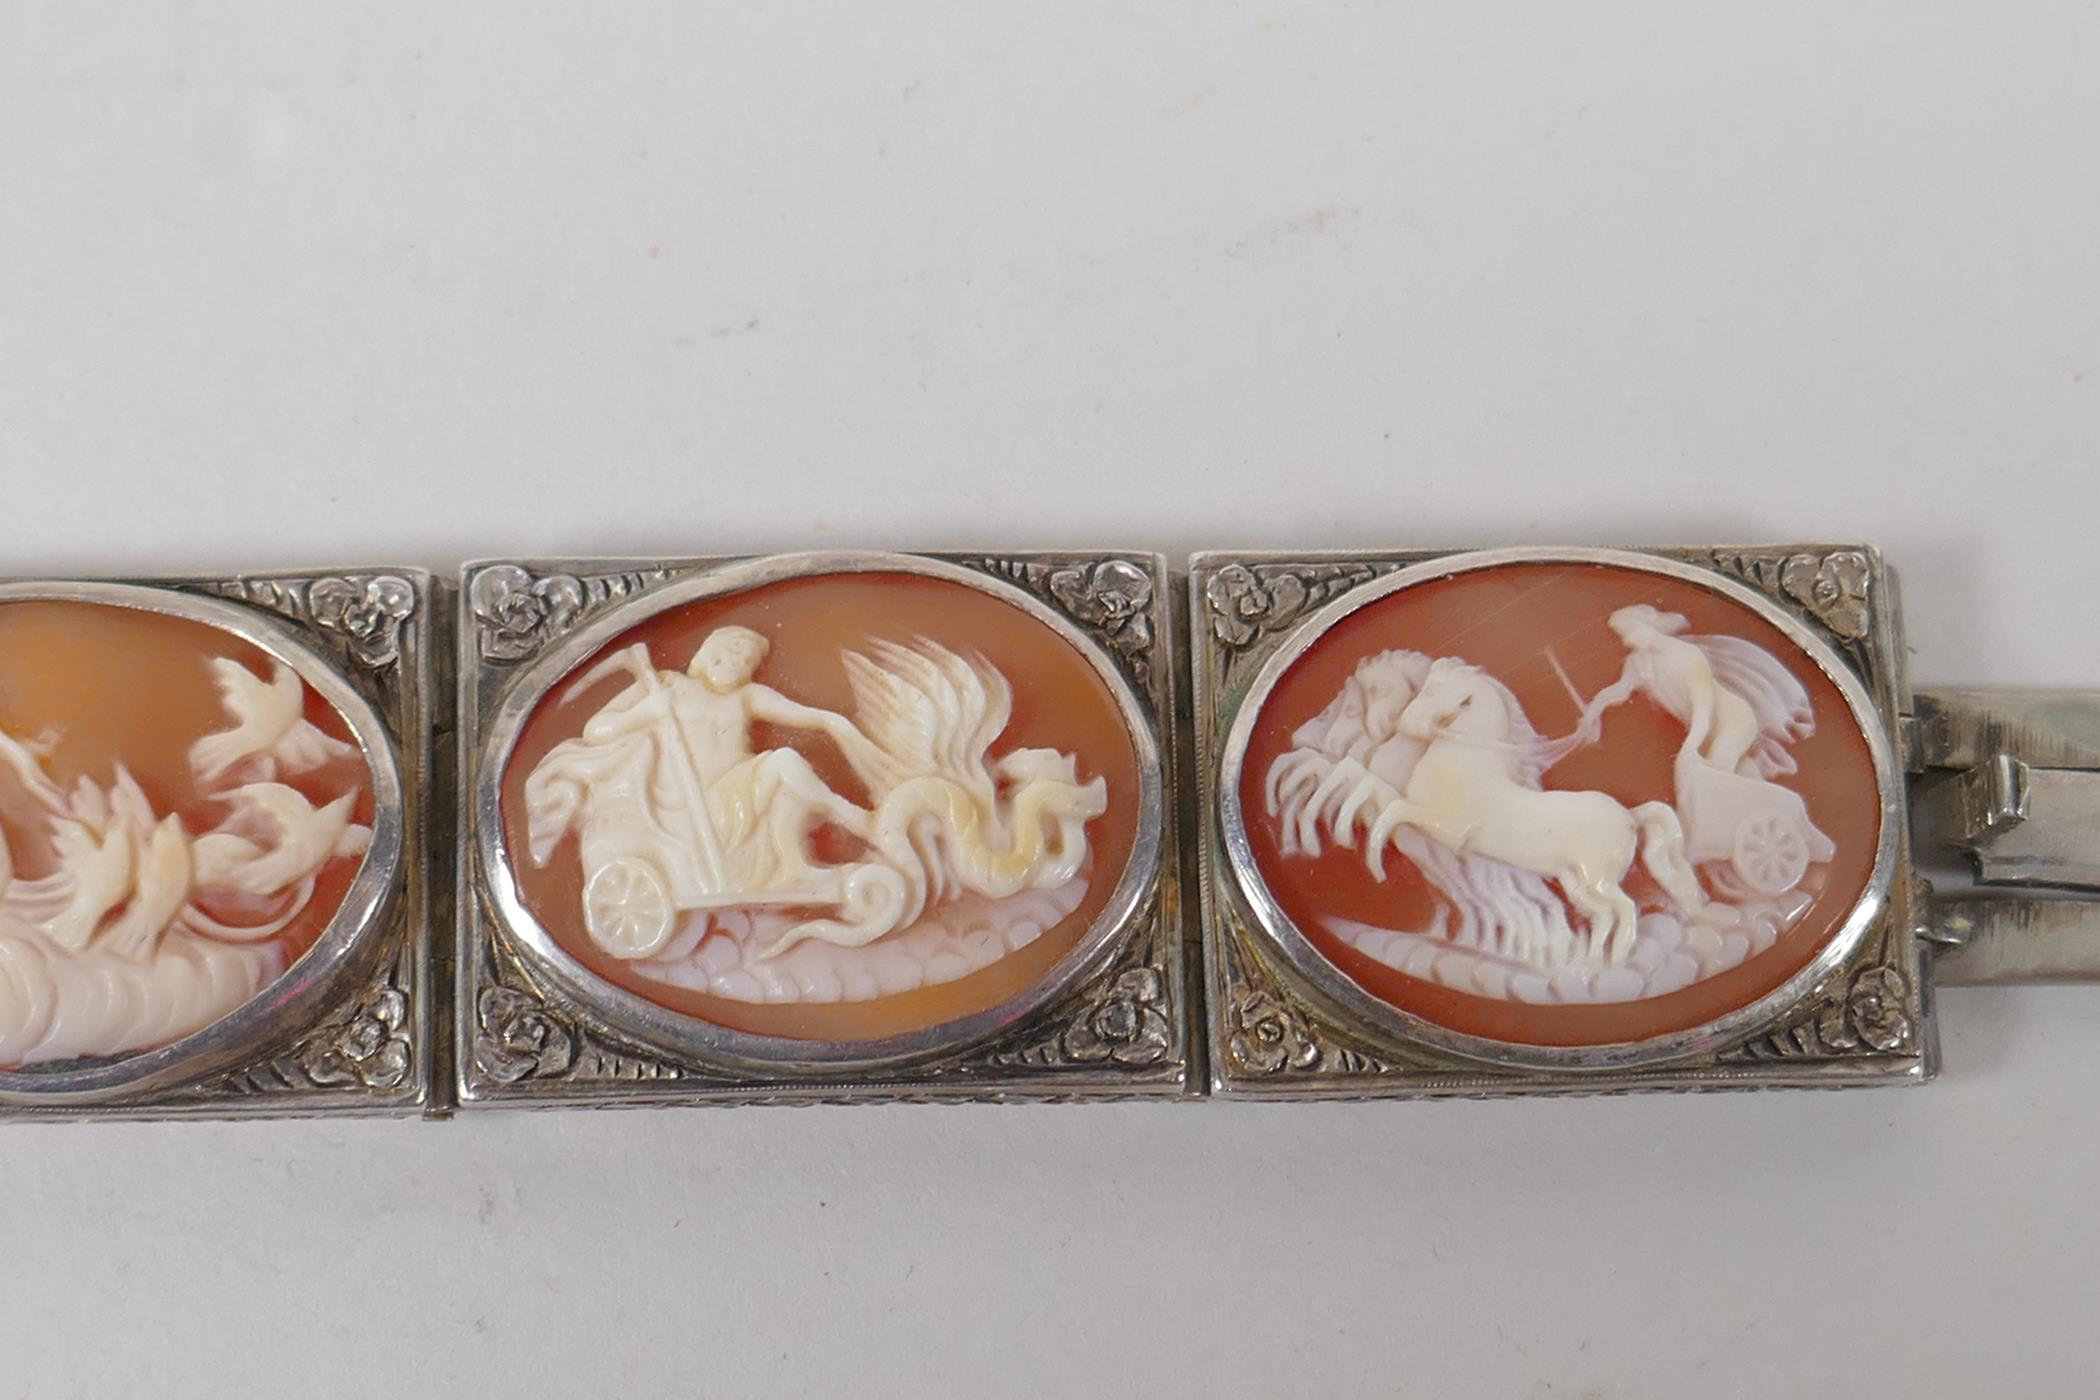 An antique silver cameo bracelet with Greco Roman decorative panels, and a matching ring, size L/M - Image 4 of 6